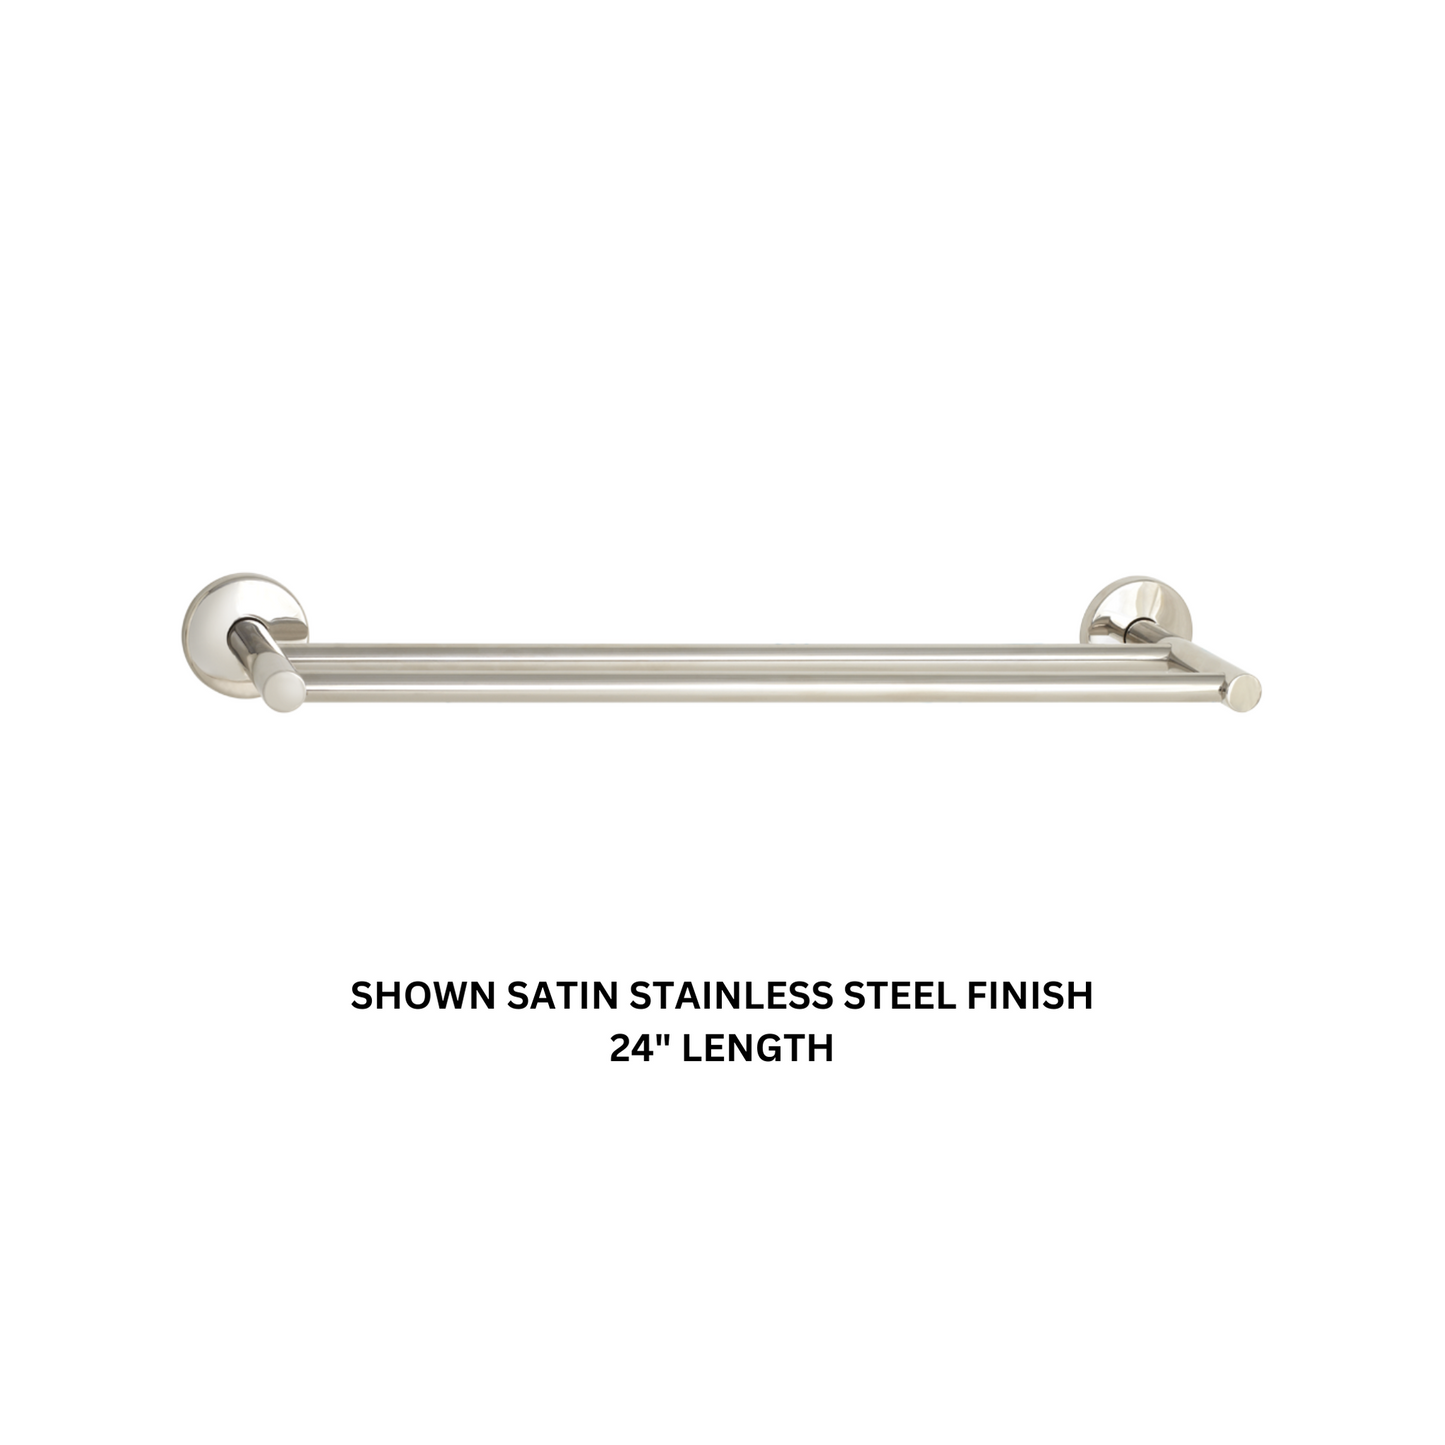 Seachrome Conorado Series 18" Almond Wrinkle Powder Coat Concealed Mounting Flange Double Towel Bar